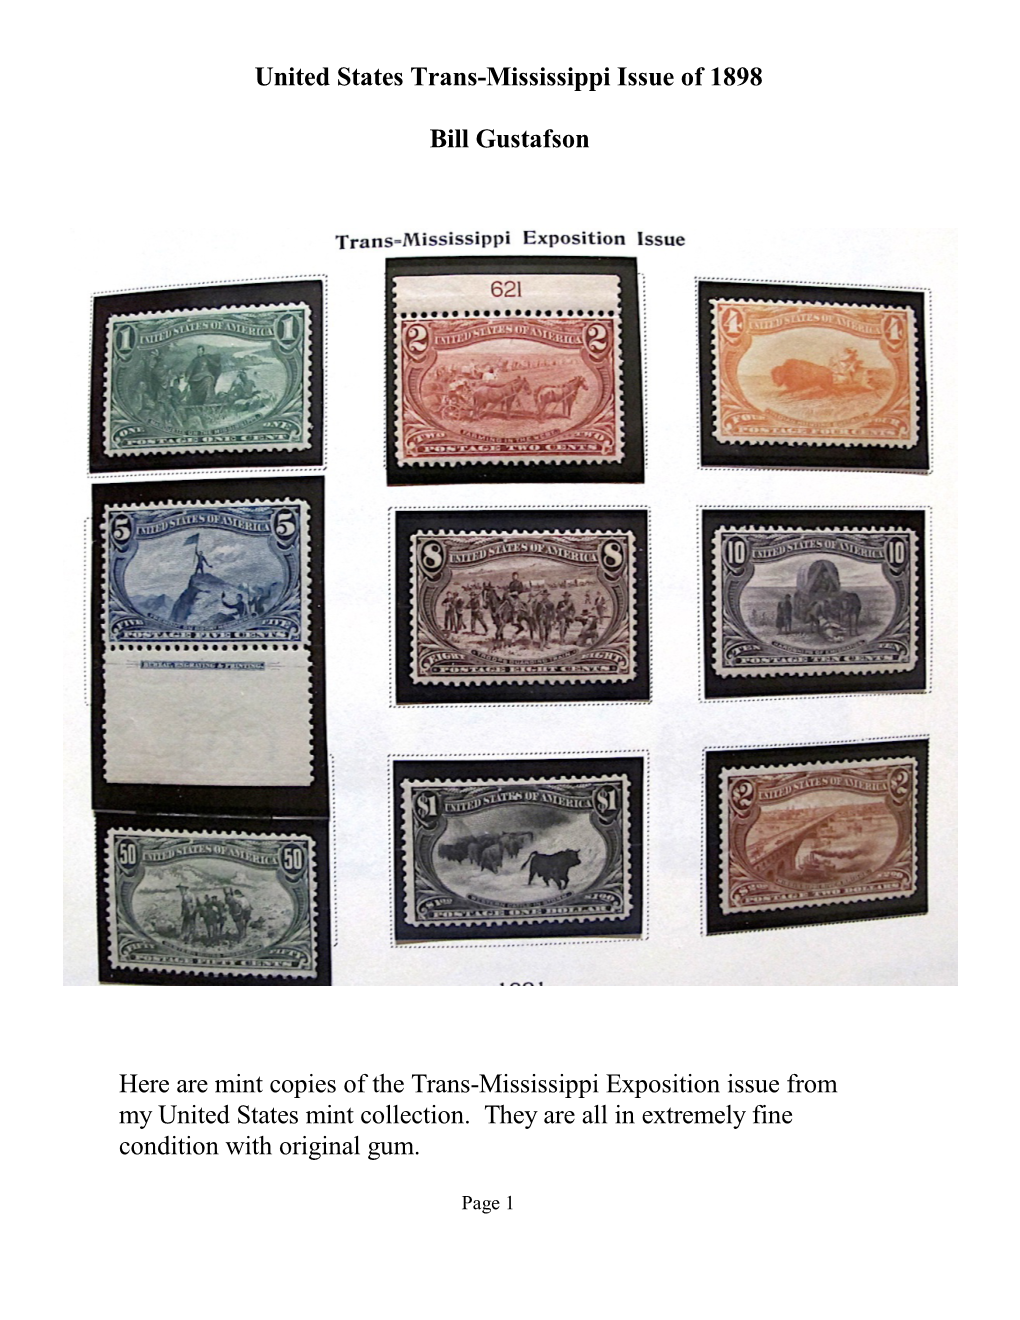 Here Are Mint Copies of the Trans-Mississippi Exposition Issue from My United States Mint Collection